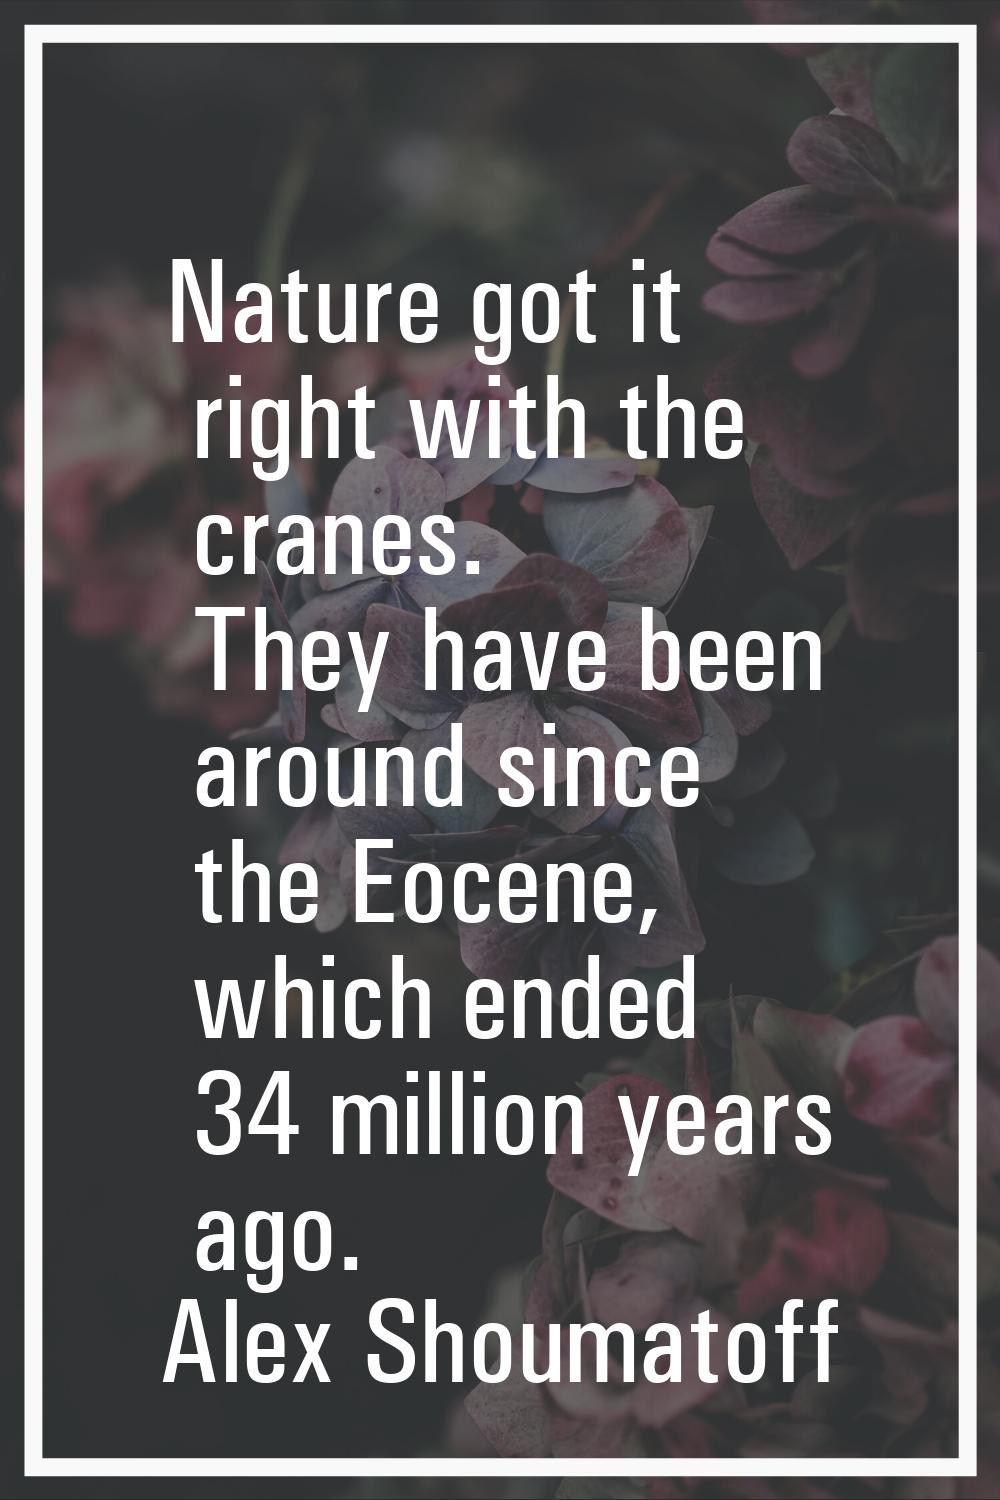 Nature got it right with the cranes. They have been around since the Eocene, which ended 34 million